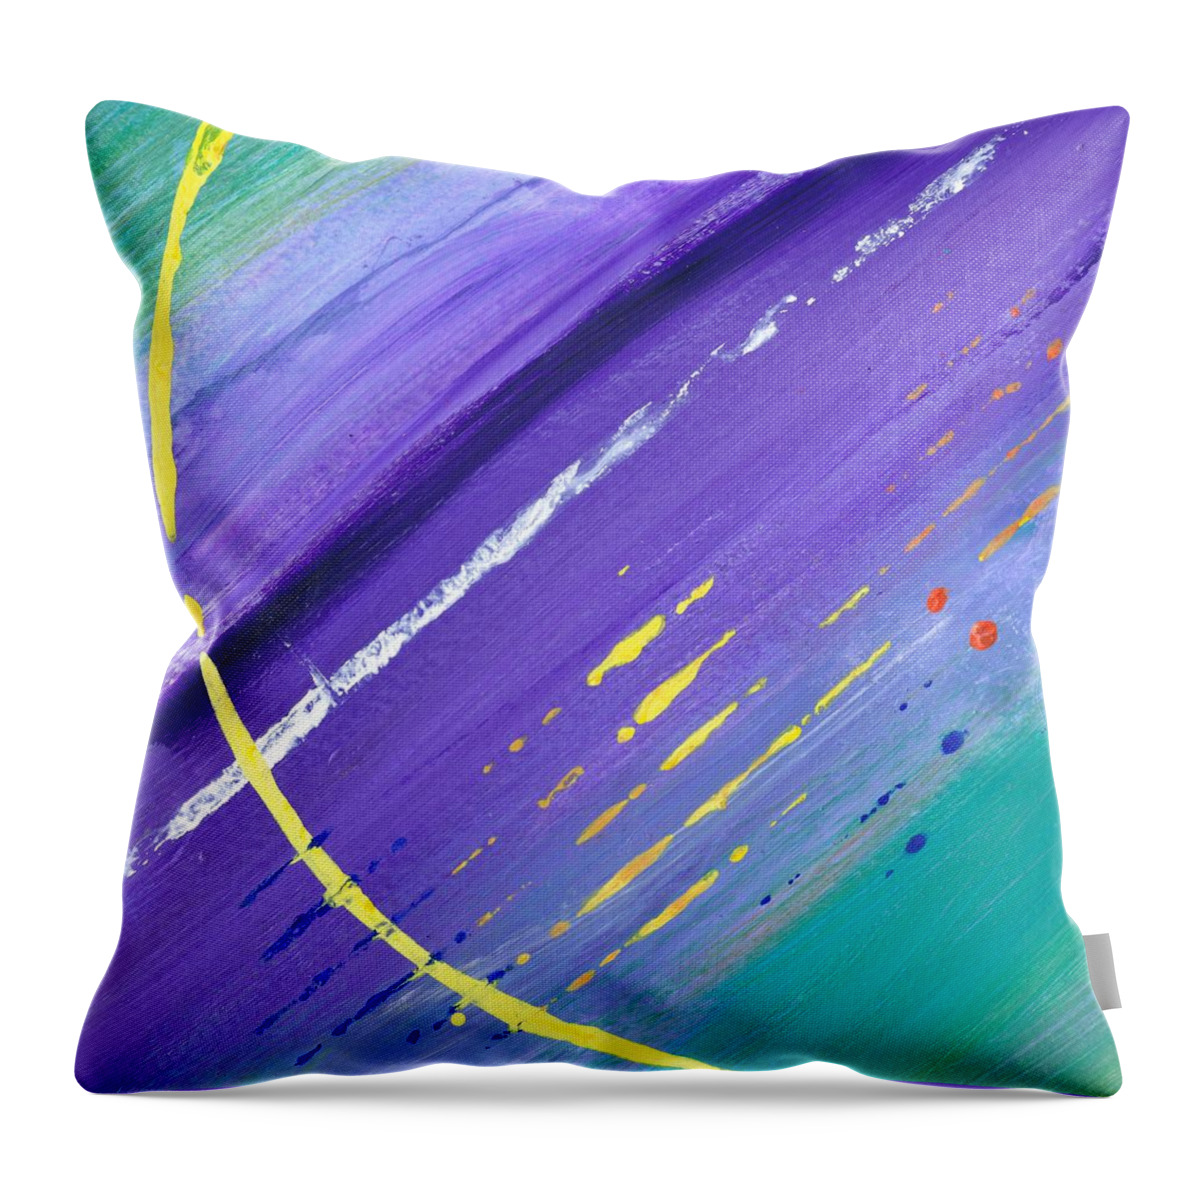 Abstracts Throw Pillow featuring the painting Listening by Bill Tomsa